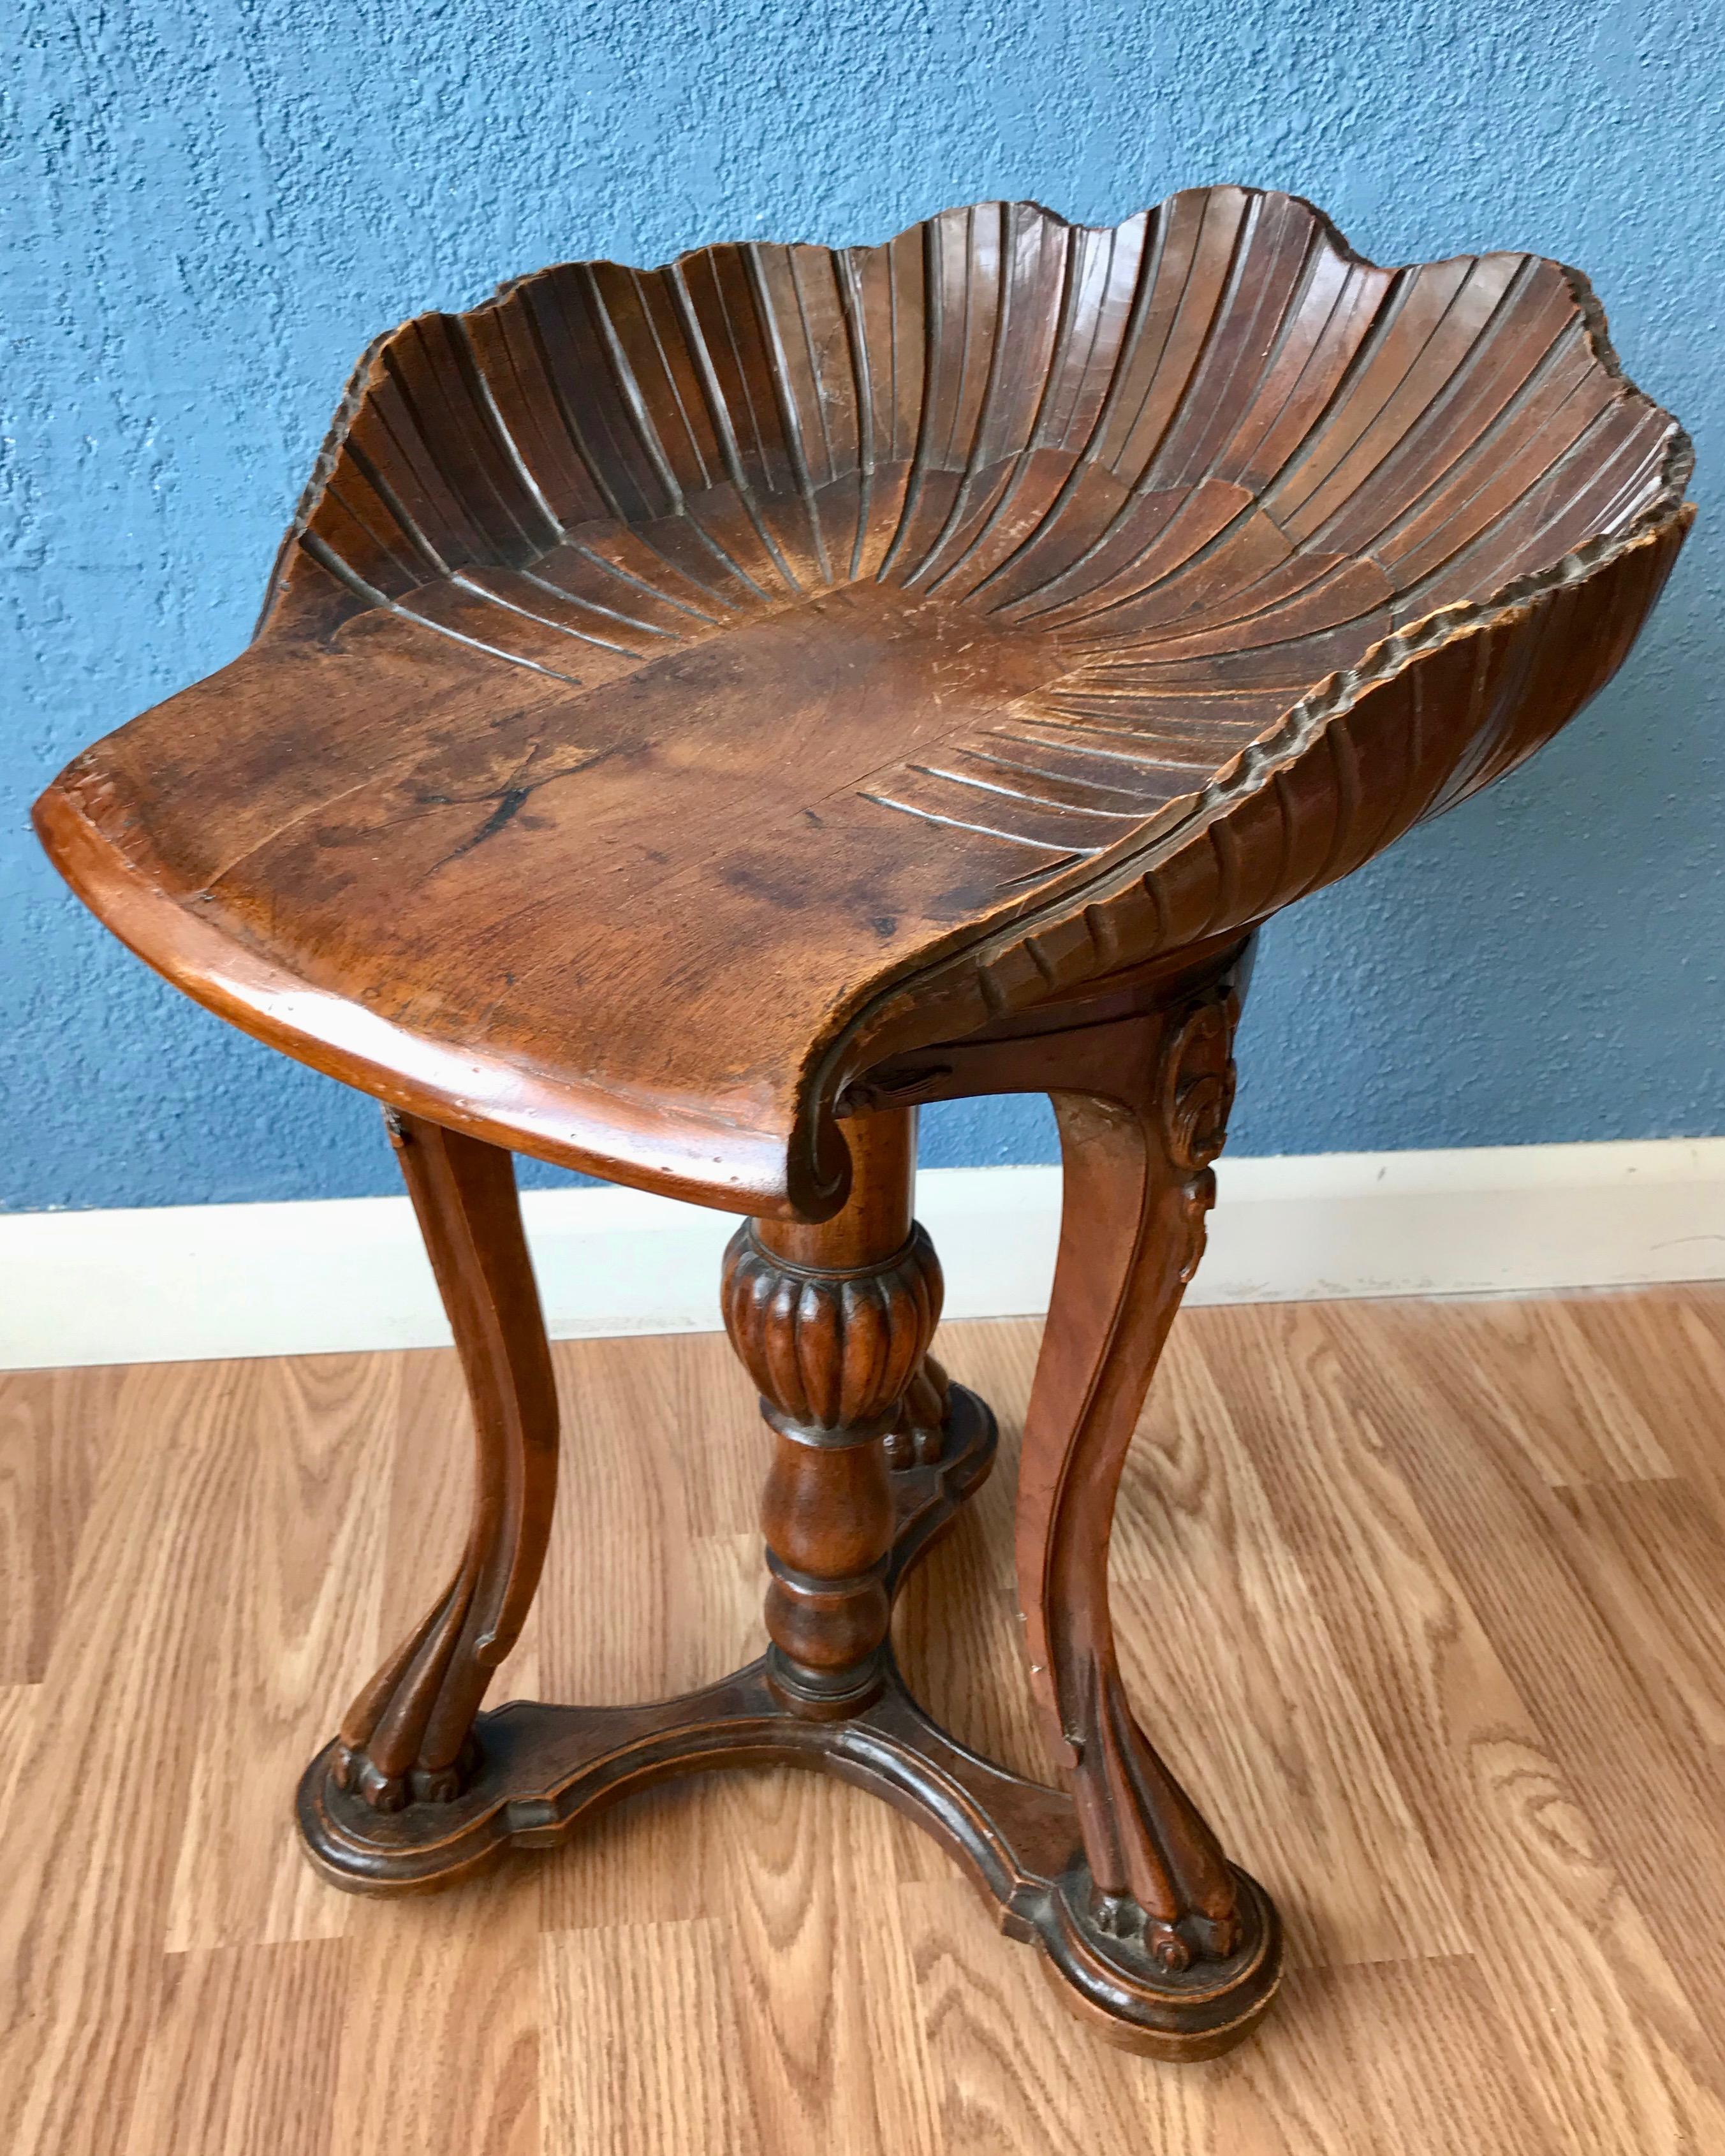 Fashioned with a shell form swivel seat. The stool is nicely carved with a mellow
fruitwood patina. Superb quality and details.